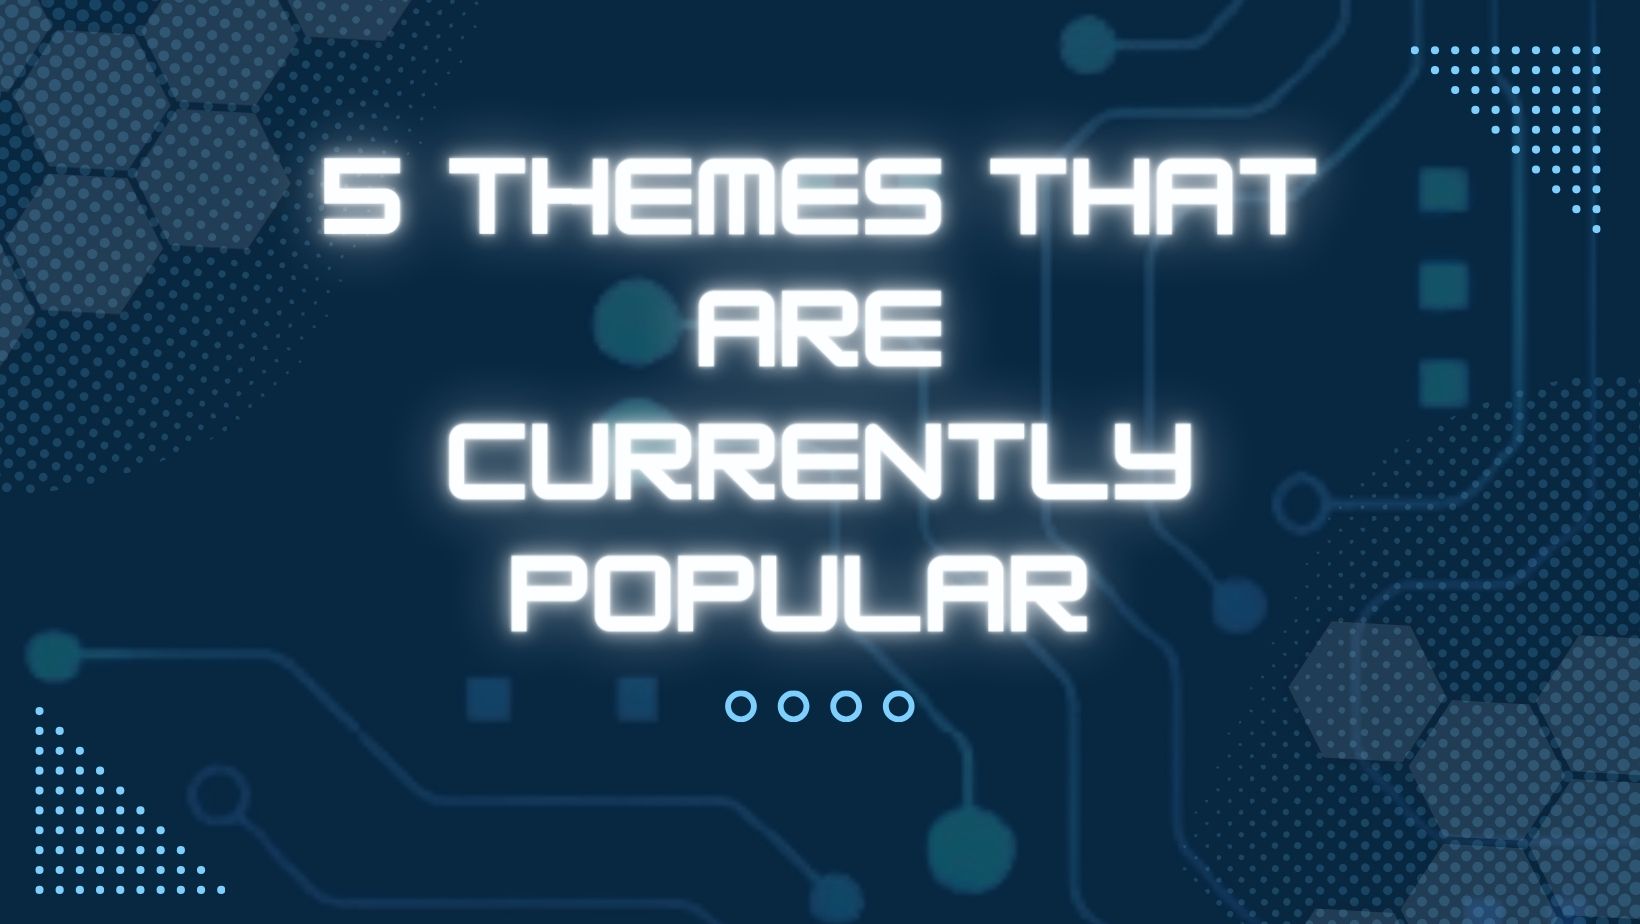 The 5 themes that are currently popular among WordPress website owners